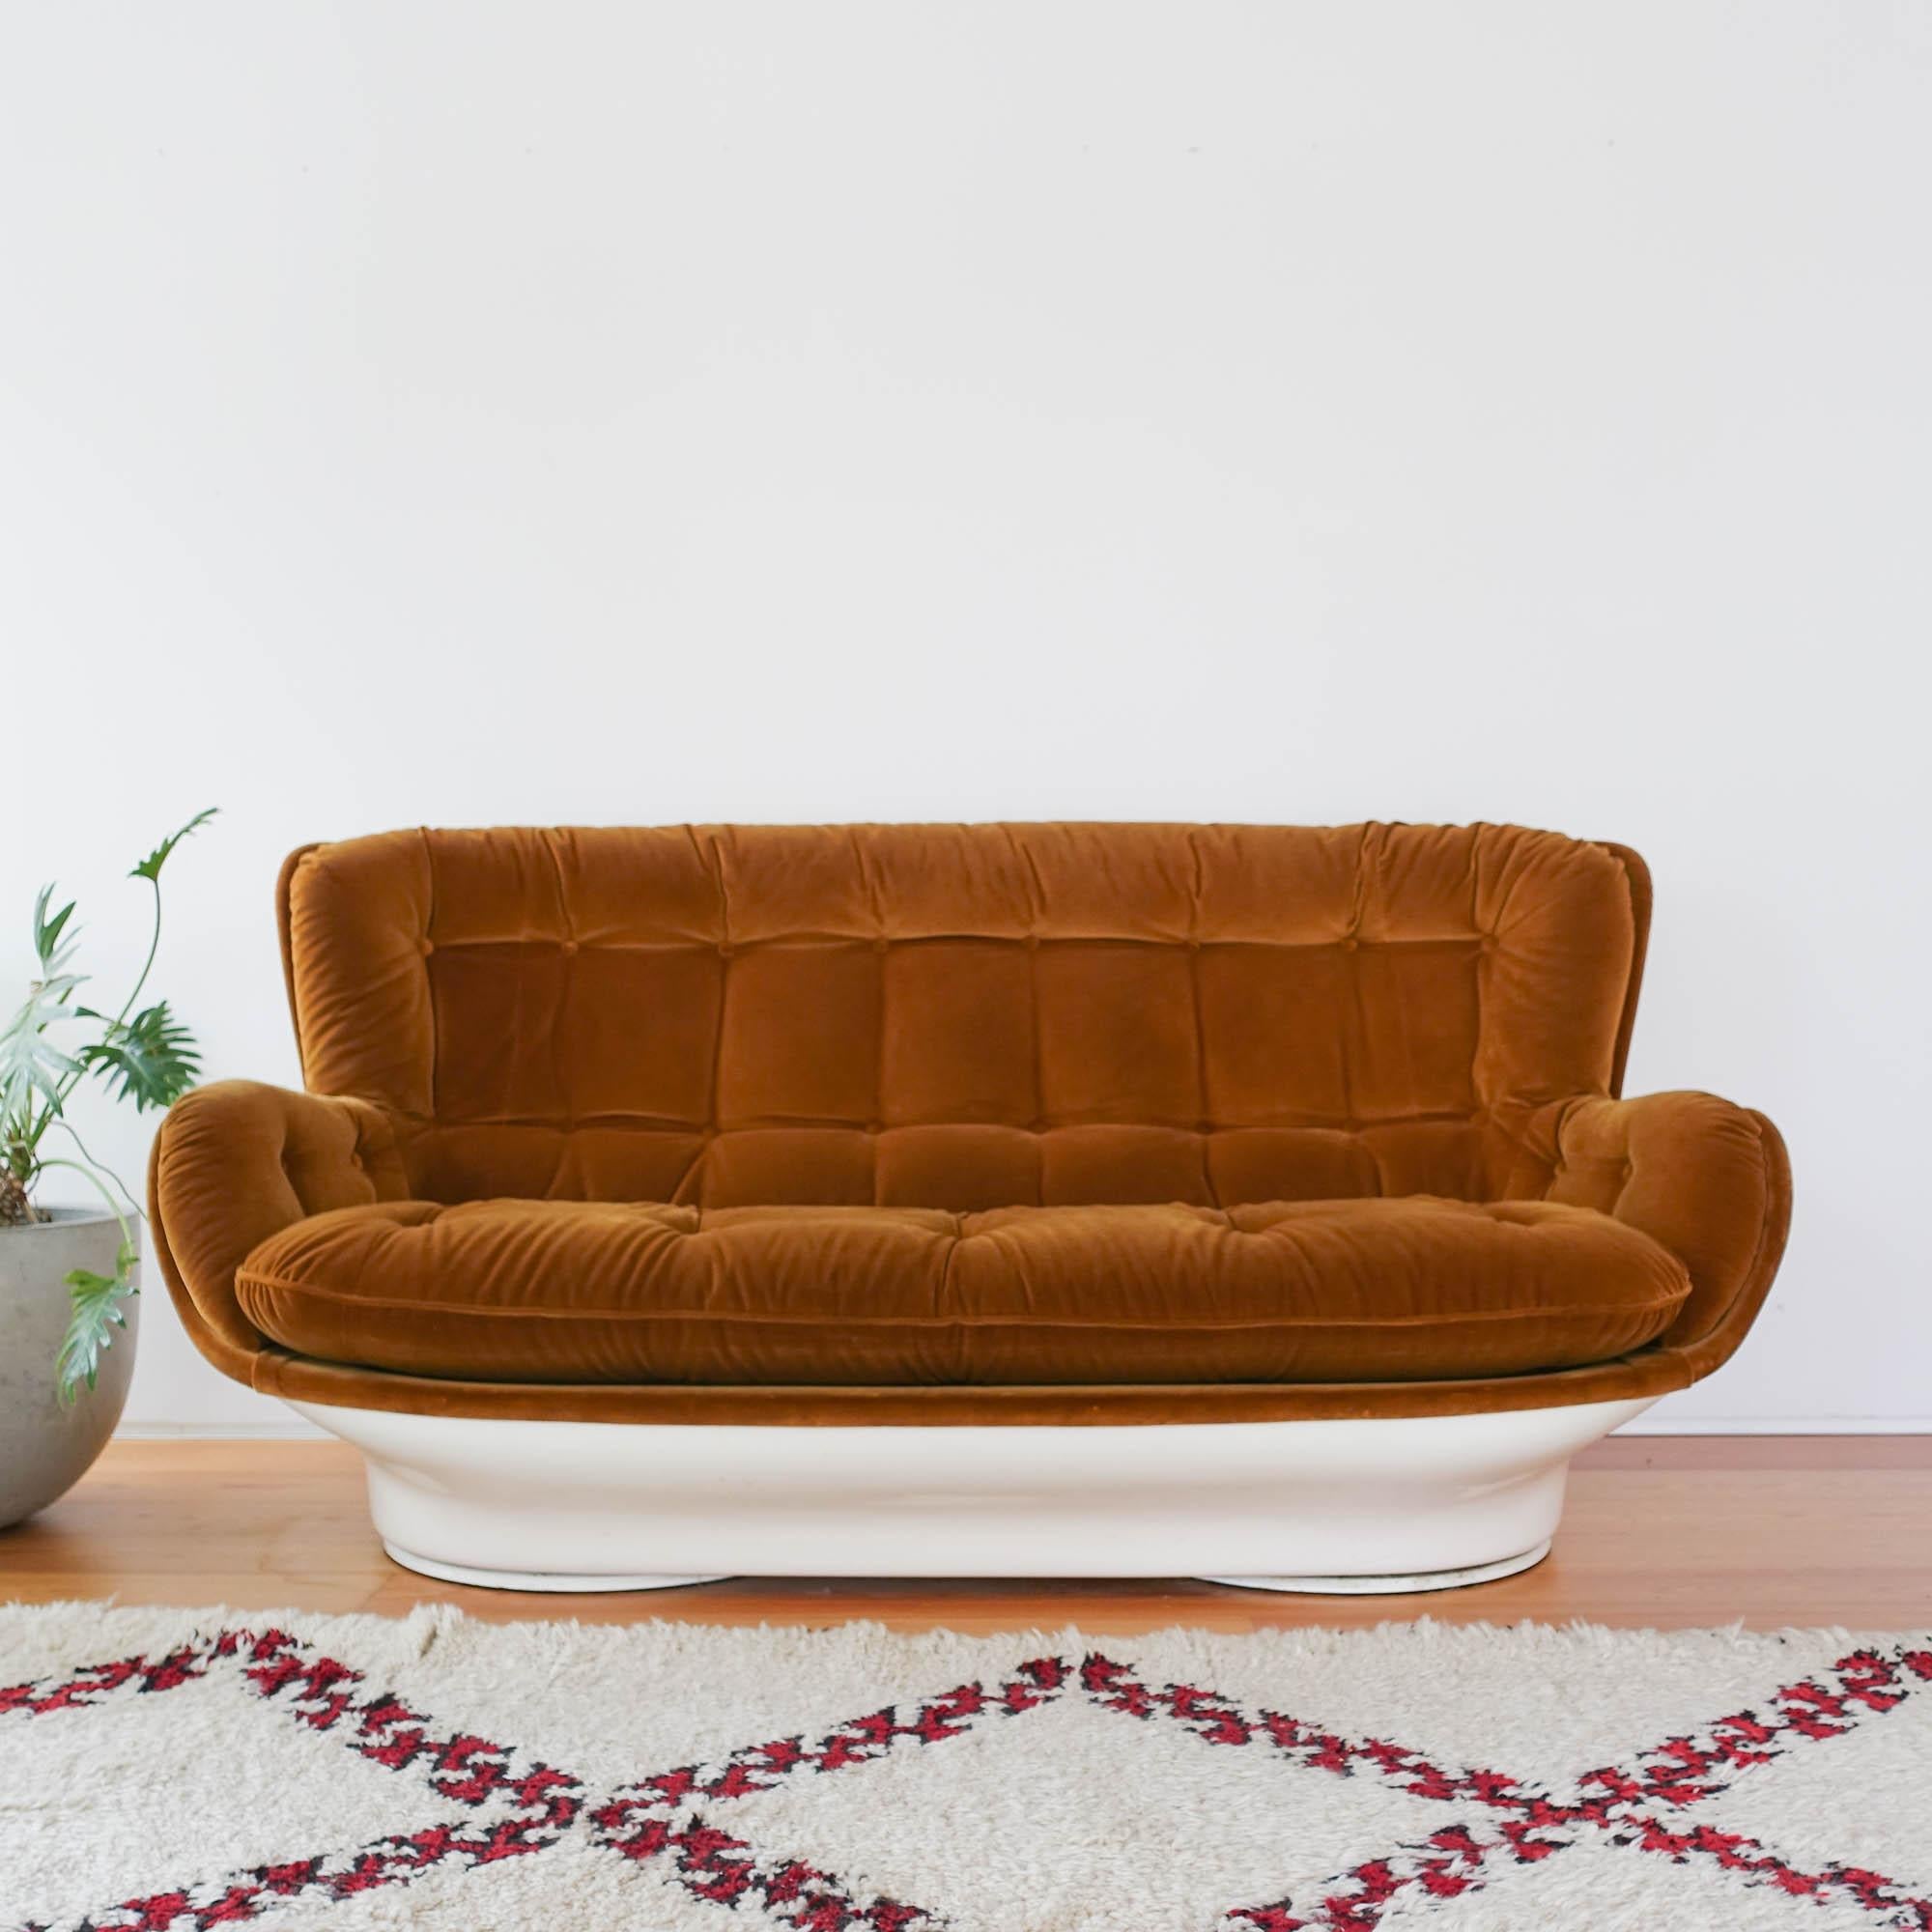 The Karate sofa was designed by Michel Cadestin for Airborne, in France, during the 1970s. This beautiful piece is a testament to the designer's skill and craftsmanship, and it has become an iconic example of the period's most celebrated